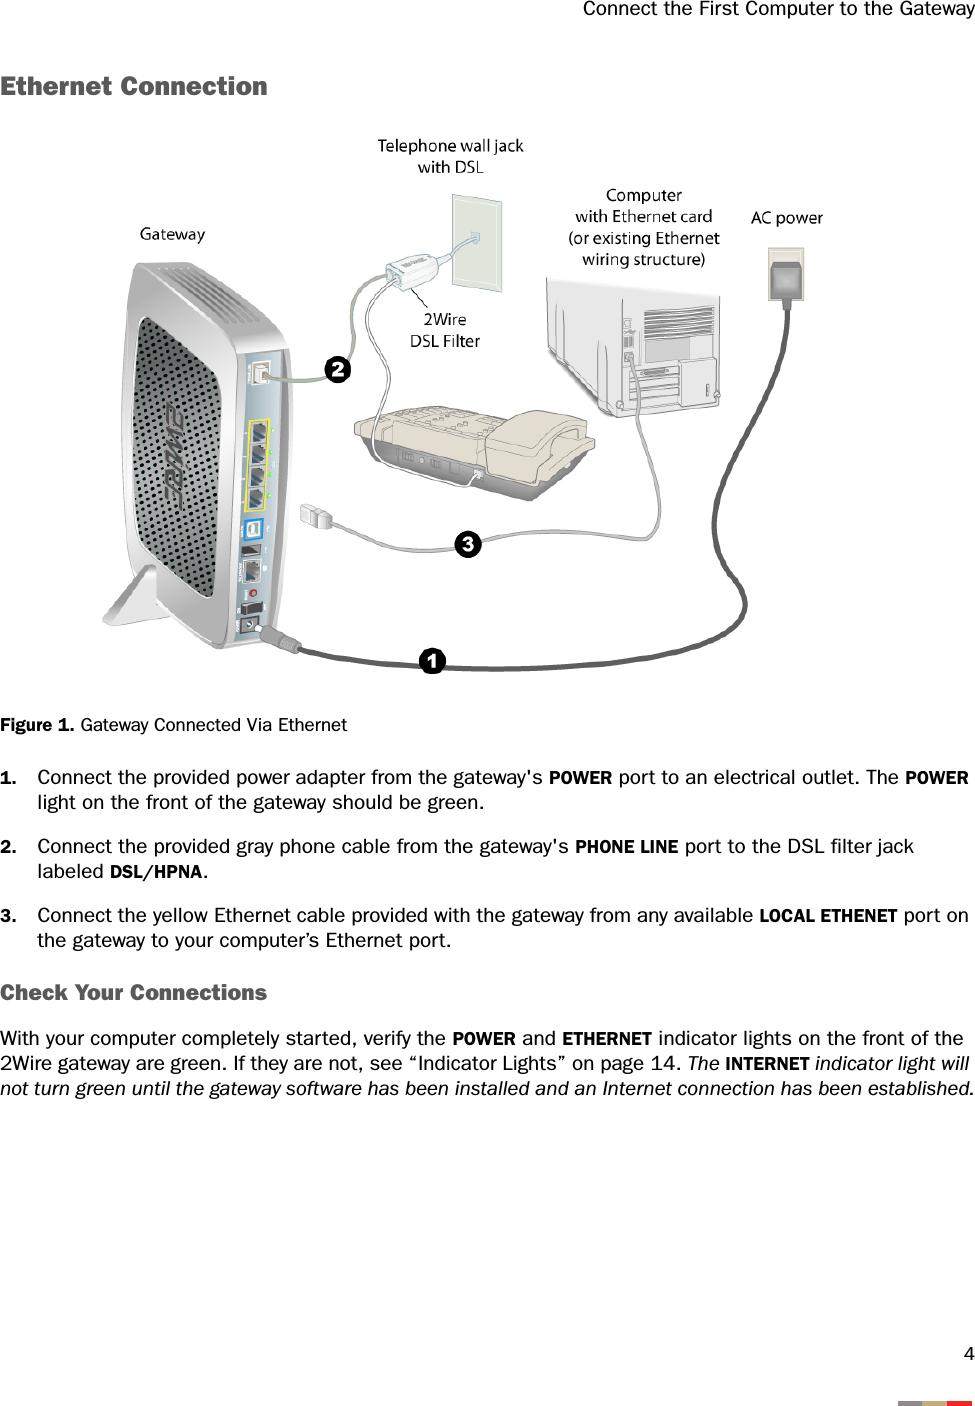 Connect the First Computer to the Gateway4Ethernet ConnectionFigure 1. Gateway Connected Via Ethernet1. Connect the provided power adapter from the gateway&apos;s POWER port to an electrical outlet. The POWER light on the front of the gateway should be green.2. Connect the provided gray phone cable from the gateway&apos;s PHONE LINE port to the DSL filter jack labeled DSL/HPNA.3. Connect the yellow Ethernet cable provided with the gateway from any available LOCAL ETHENET port on the gateway to your computer’s Ethernet port.Check Your ConnectionsWith your computer completely started, verify the POWER and ETHERNET indicator lights on the front of the 2Wire gateway are green. If they are not, see “Indicator Lights” on page 14. The INTERNET indicator light will not turn green until the gateway software has been installed and an Internet connection has been established.